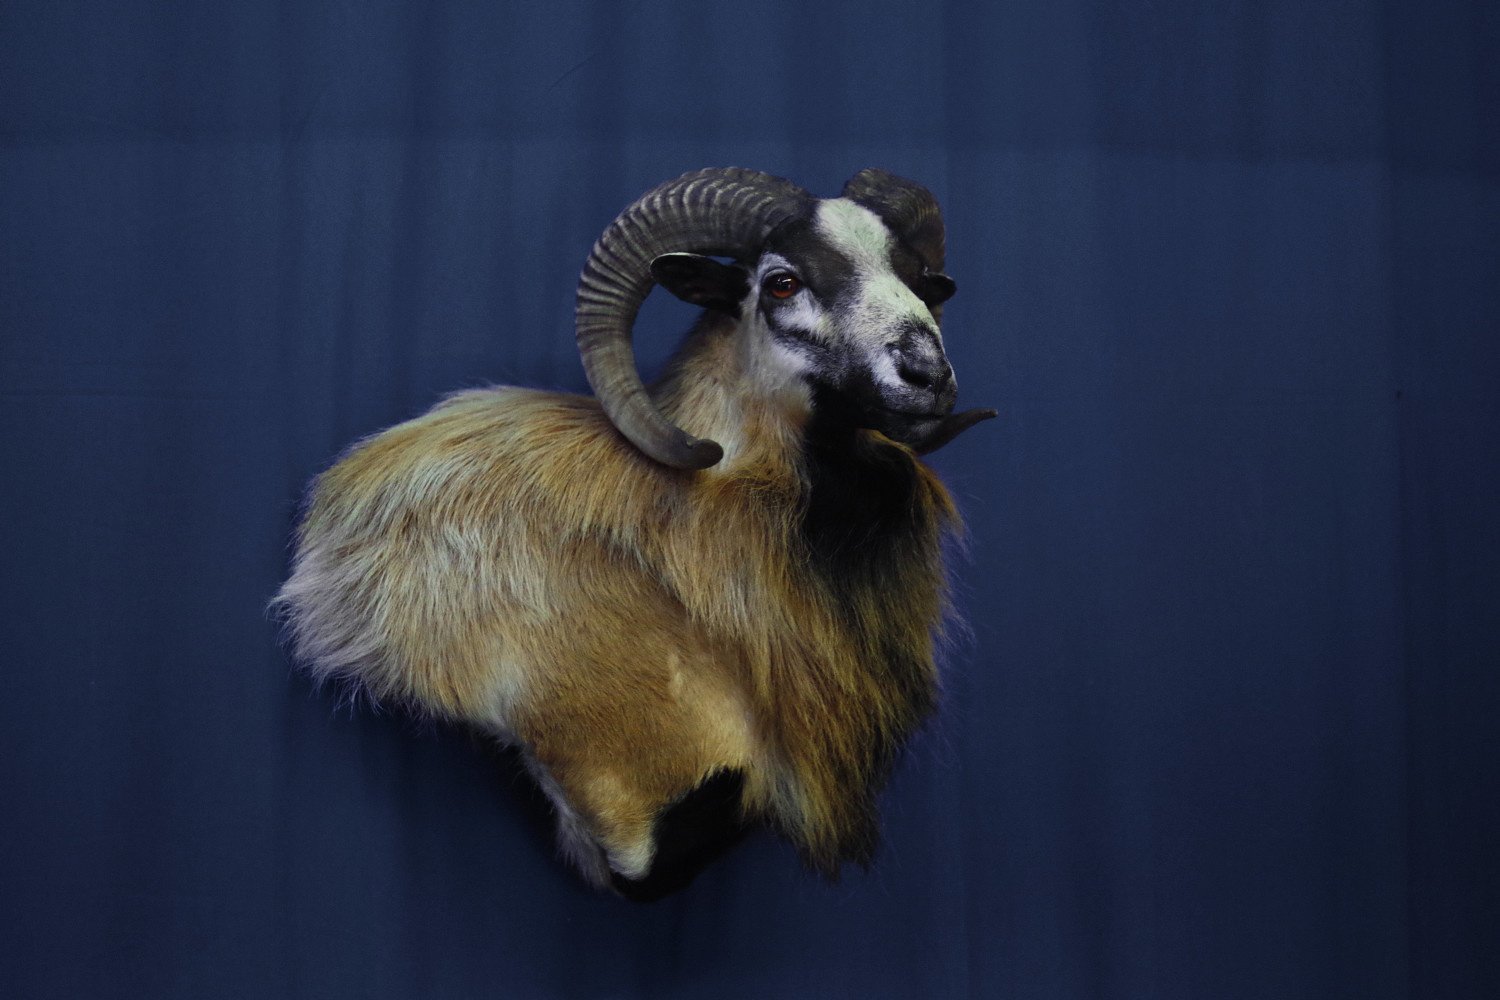 Many of the game farm exotics, such as this Corsican ram, look best as a wall pedestal